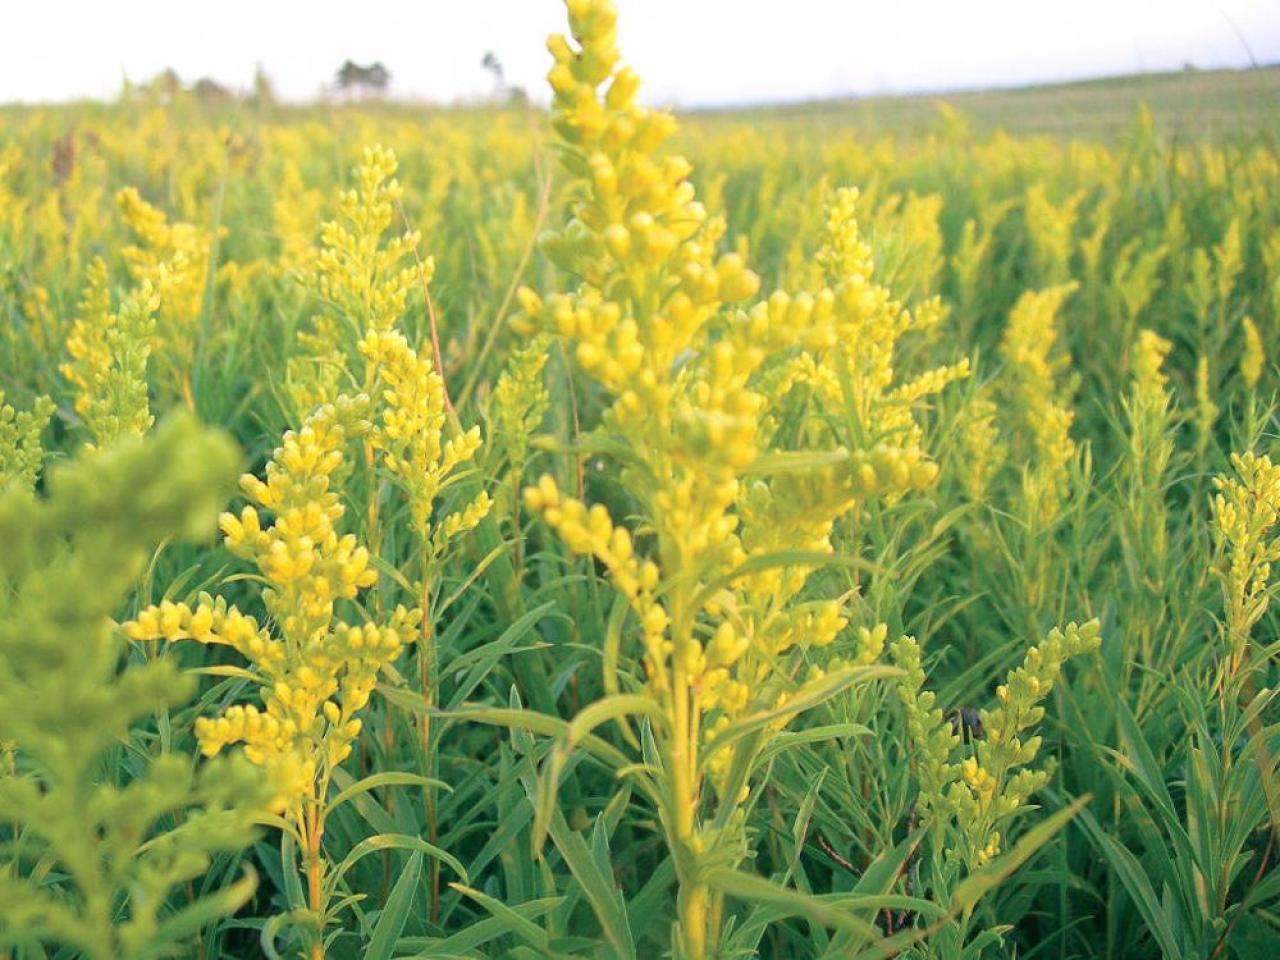 A field of showy golden flowers is a common site in late summer, but is goldenrod to blame for our allergies?